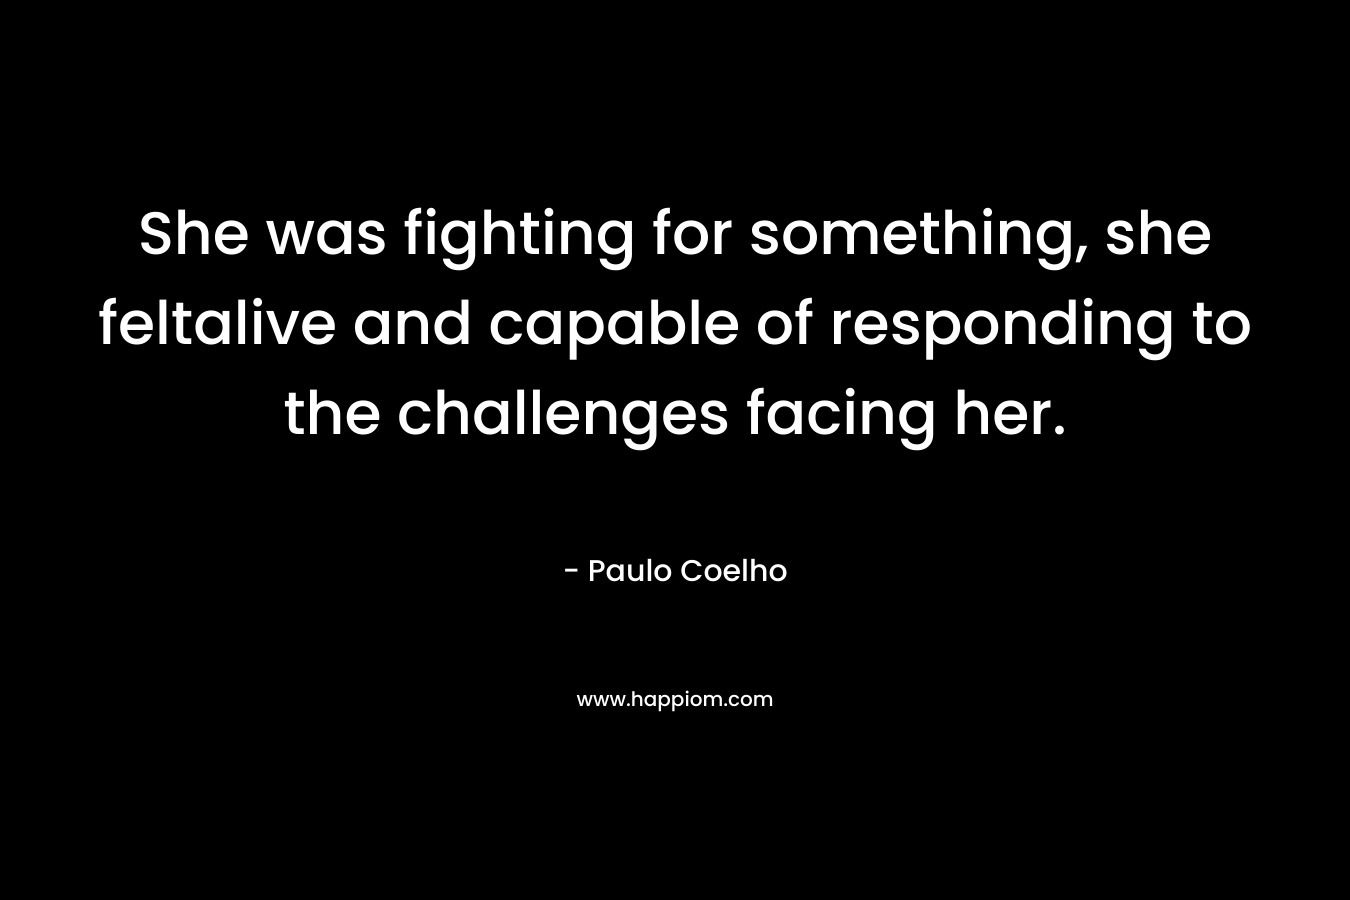 She was fighting for something, she feltalive and capable of responding to the challenges facing her.